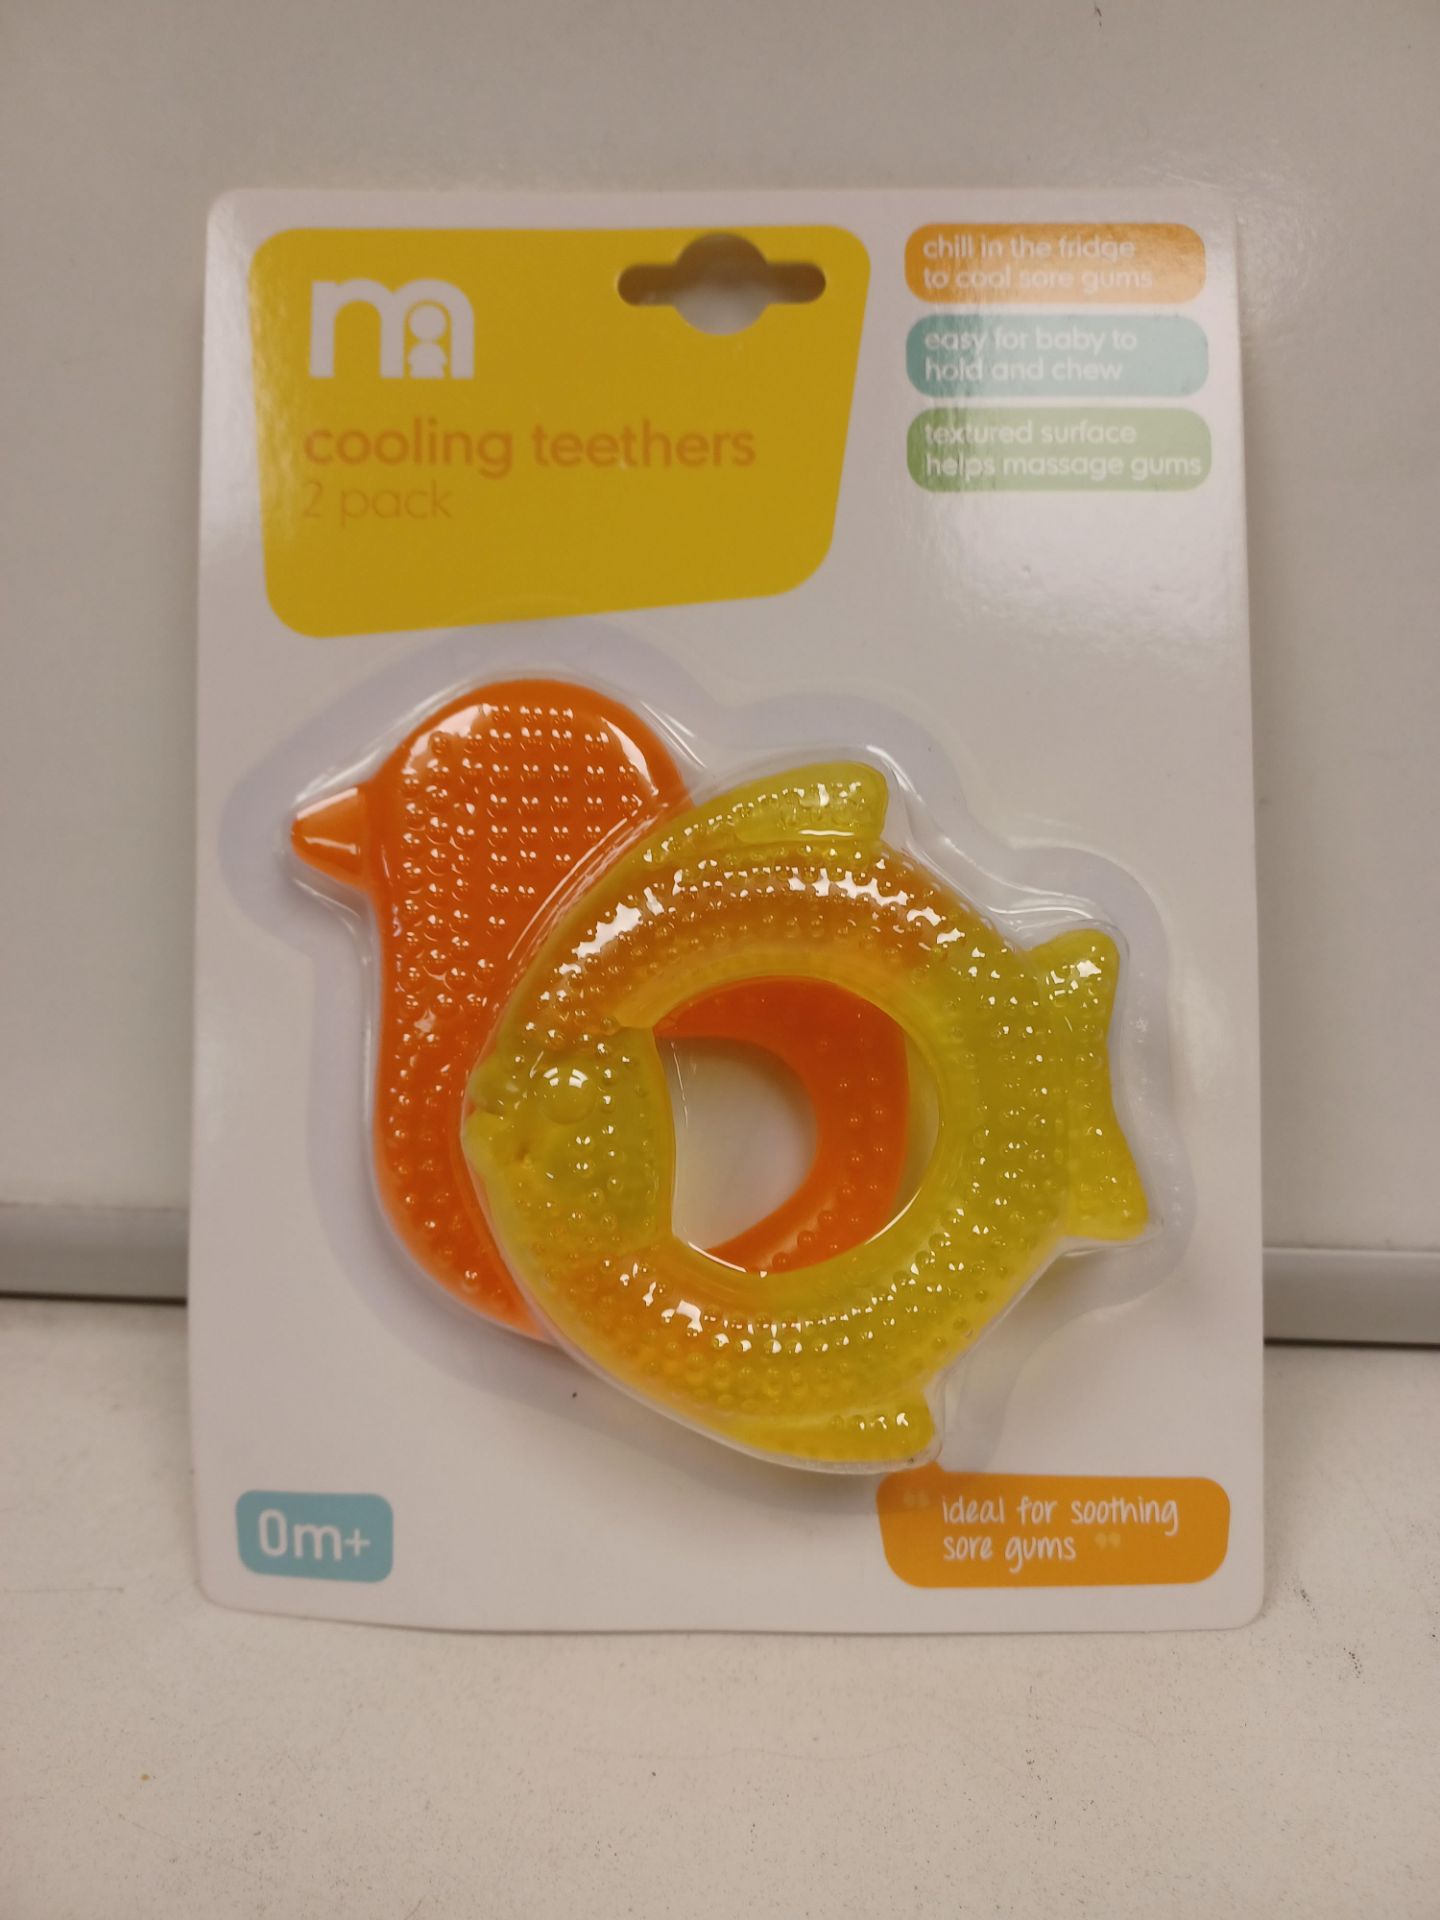 30 X BRAND NEW MOTHERCARE PACKS OF 2 COOLING TEETHER SETS R4-6